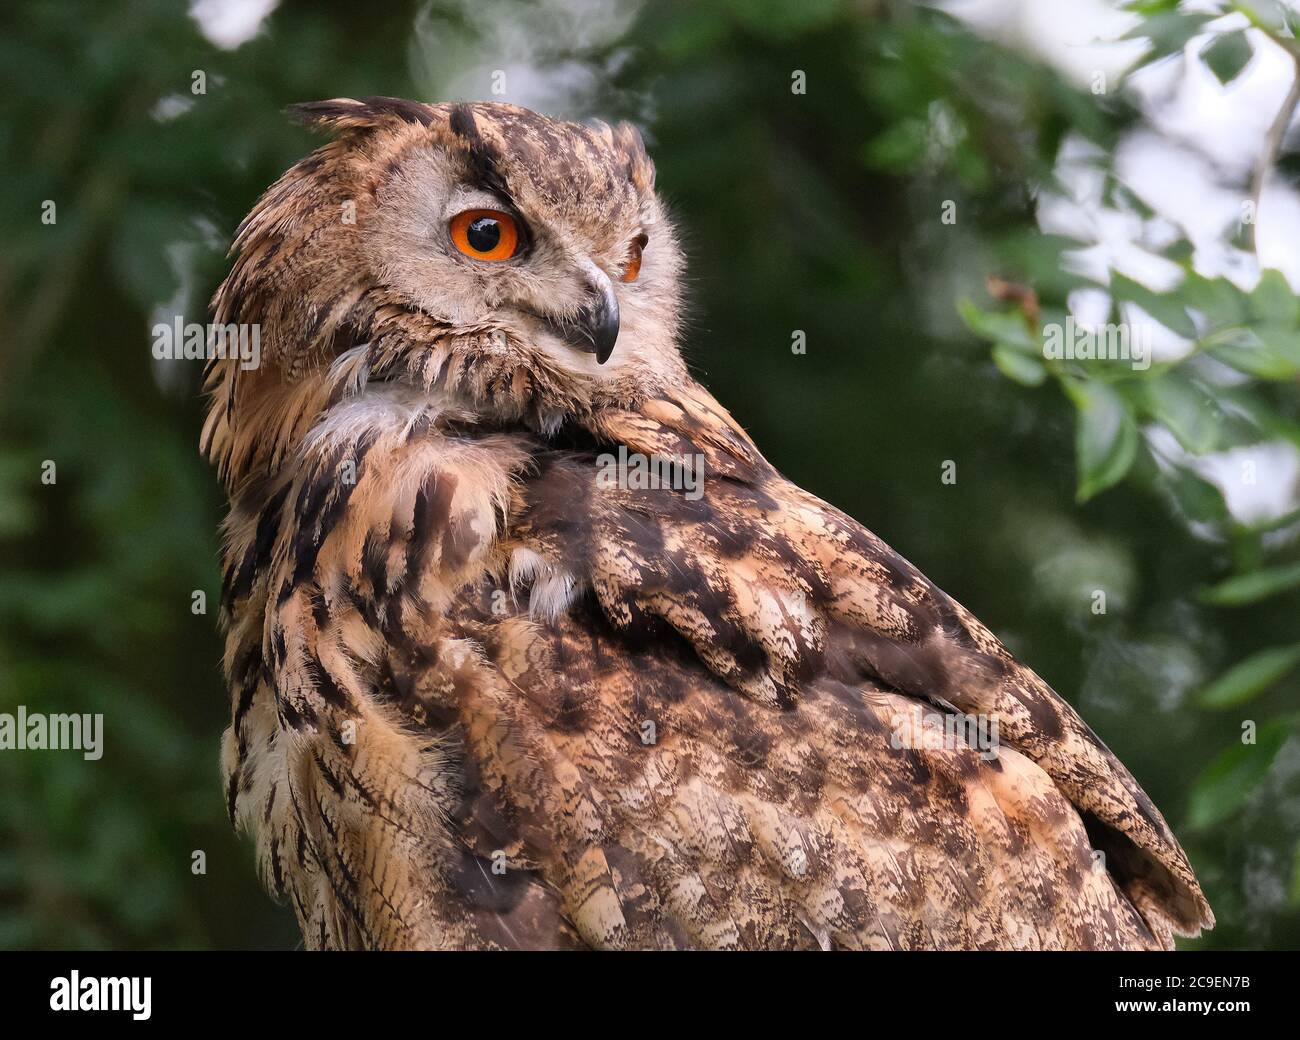 Eagle Owl on display at wildlife park in UK. Stock Photo